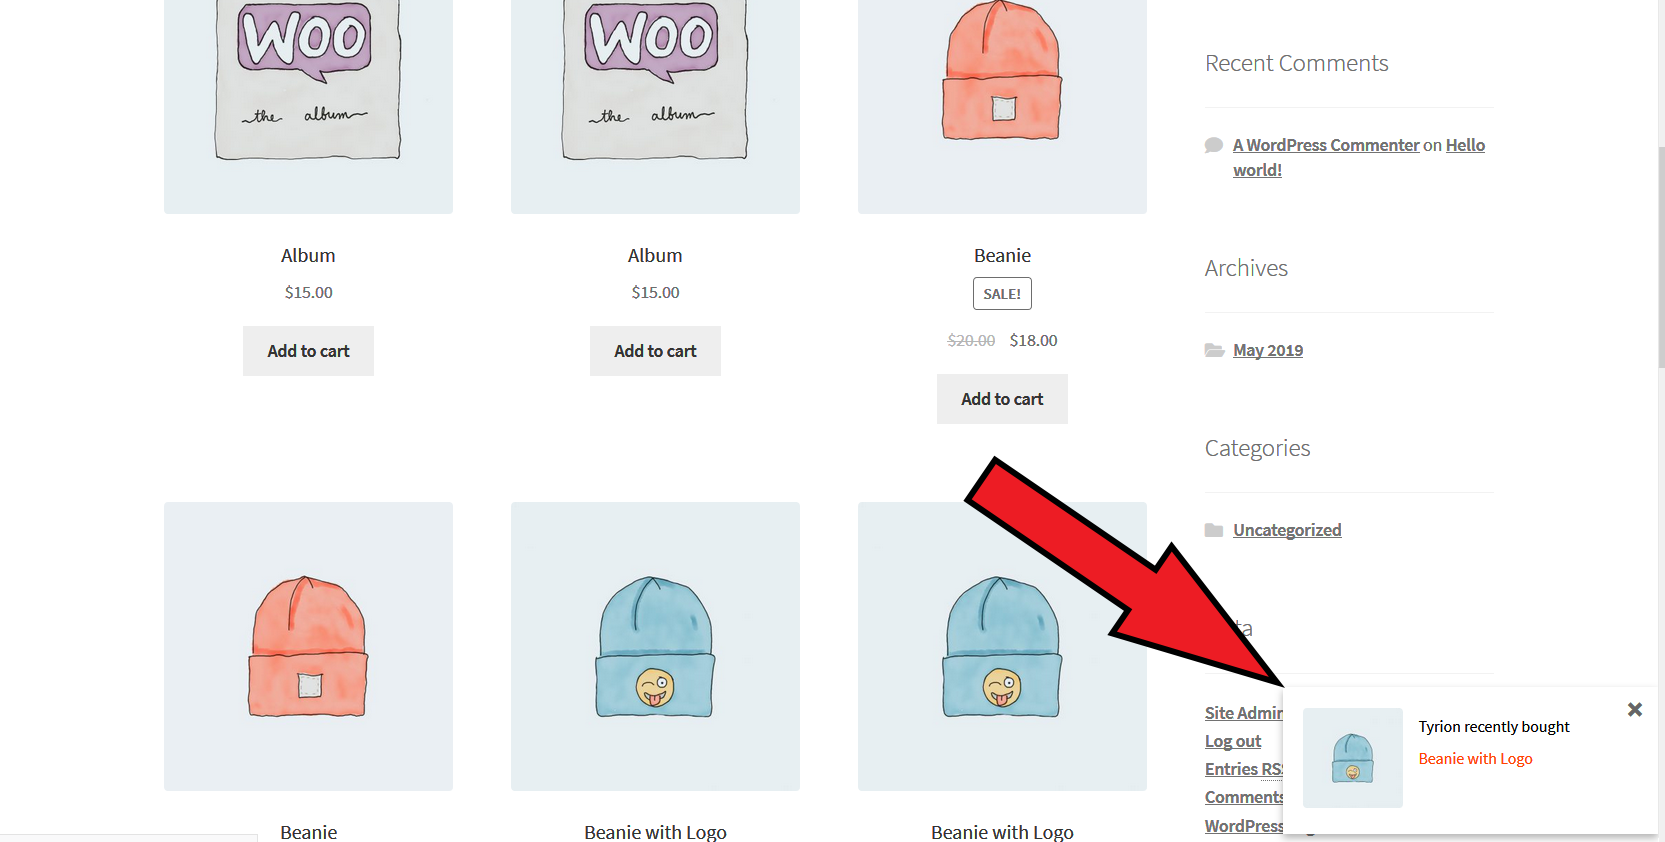 Screenshot 1 - Recently Bought This for WooCommerce - store front.